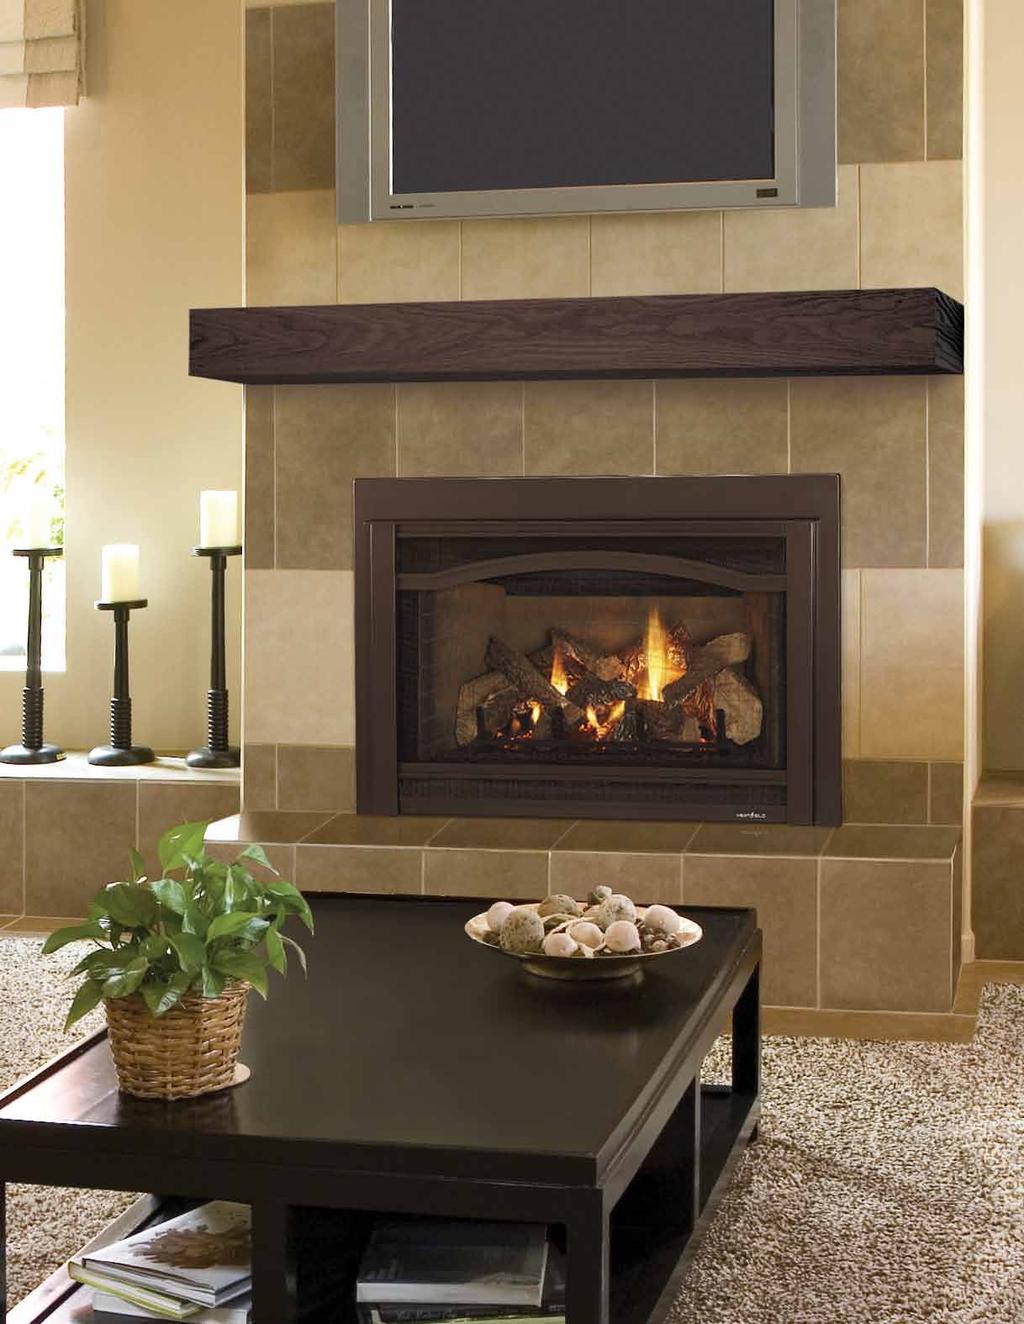 Innovative Fireplace Upgrades Heat & Glo is the innovative leader in technology, design and safety.